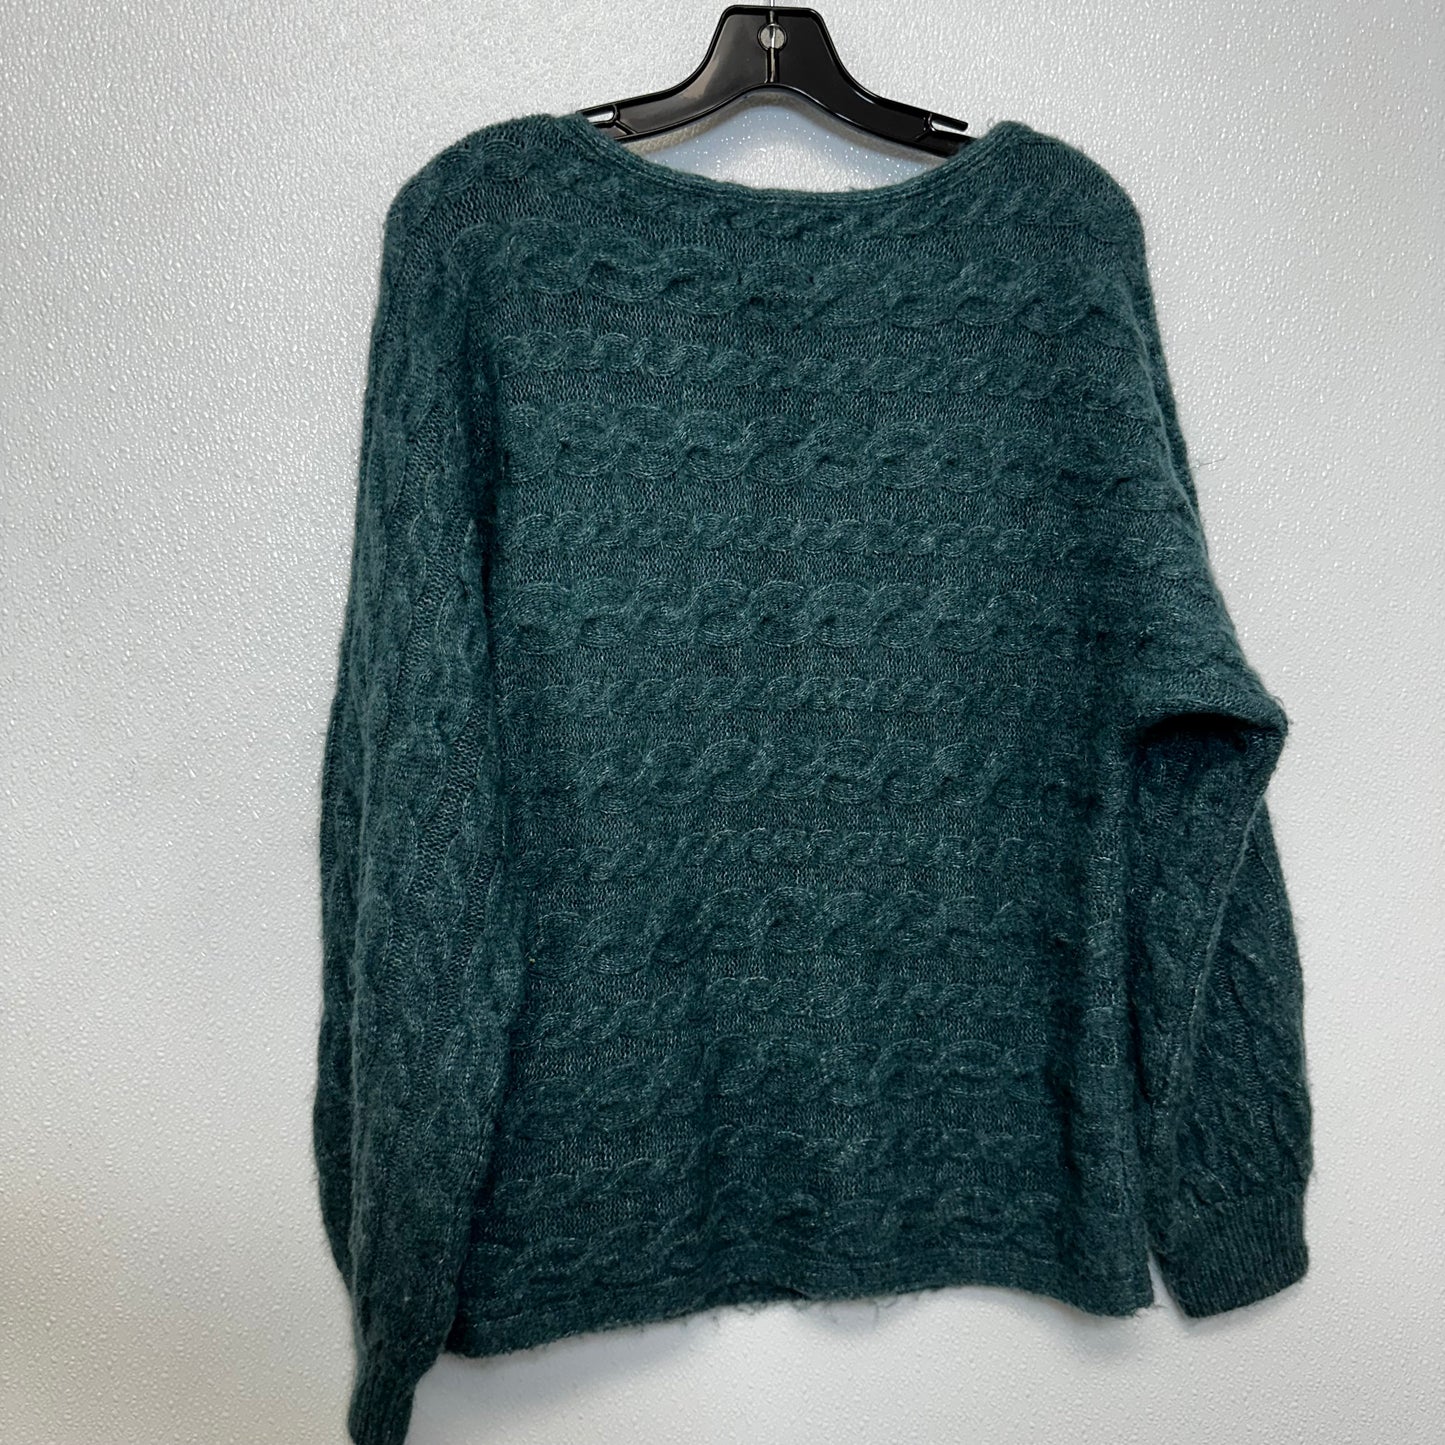 Green Sweater Abercrombie And Fitch, Size M